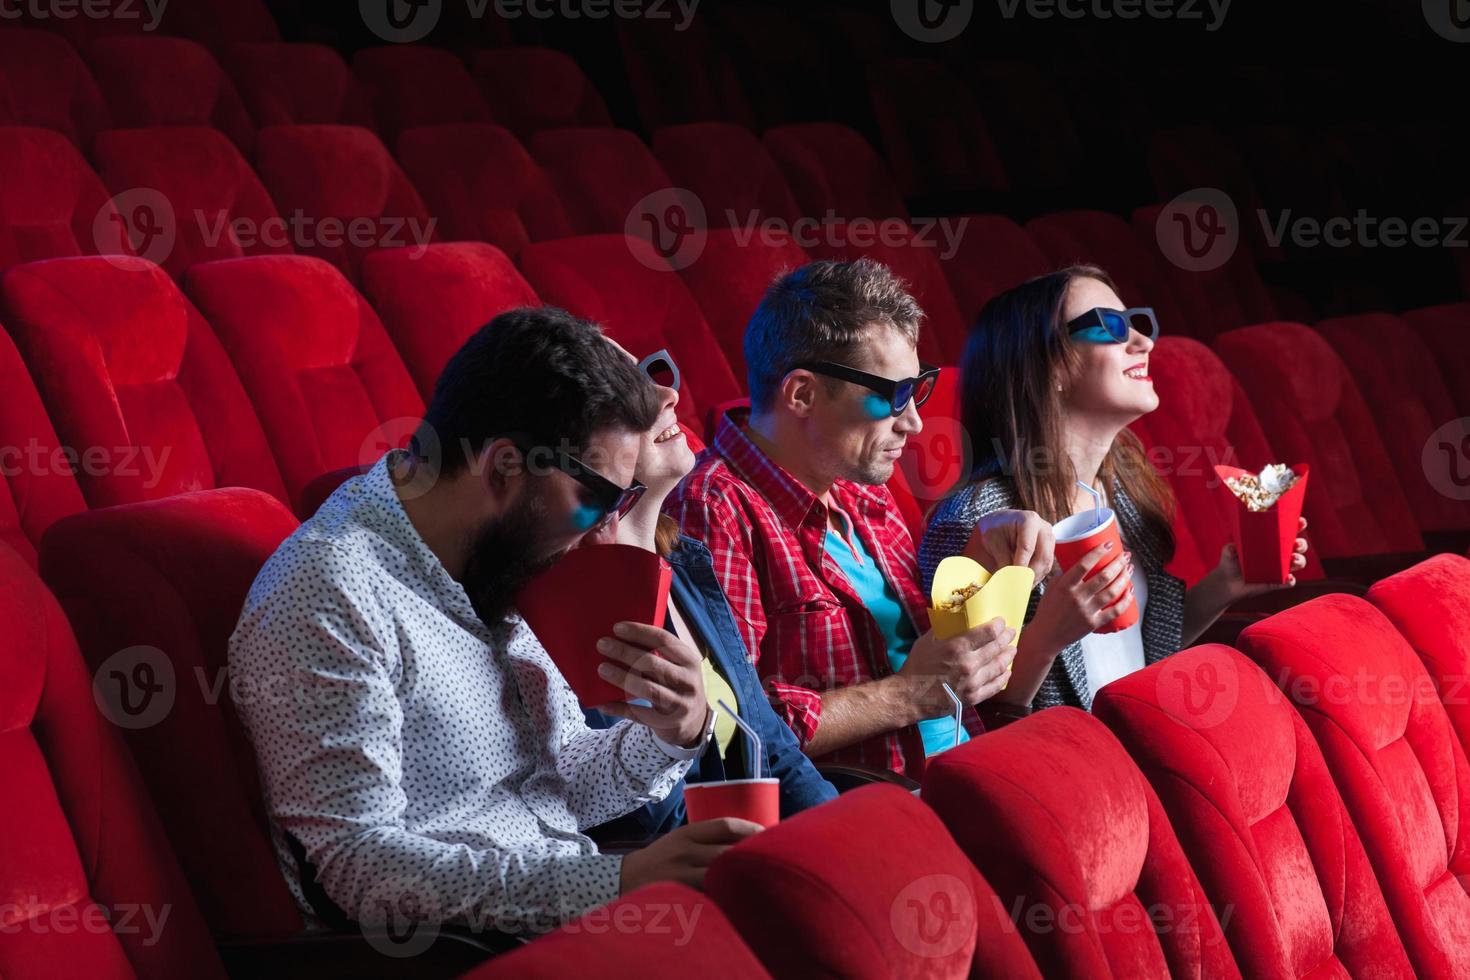 The people's emotions in the cinema photo